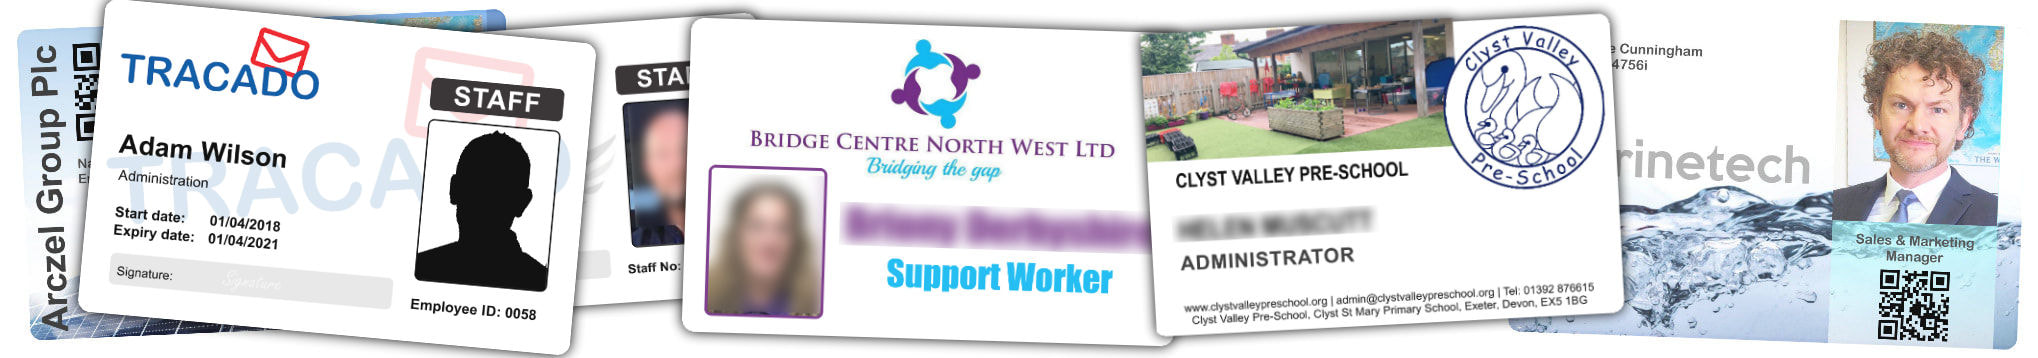 Rochdale examples of our ID card printing facility. | Showing samples of employee Identity card printing | Workers ID cards printed in 